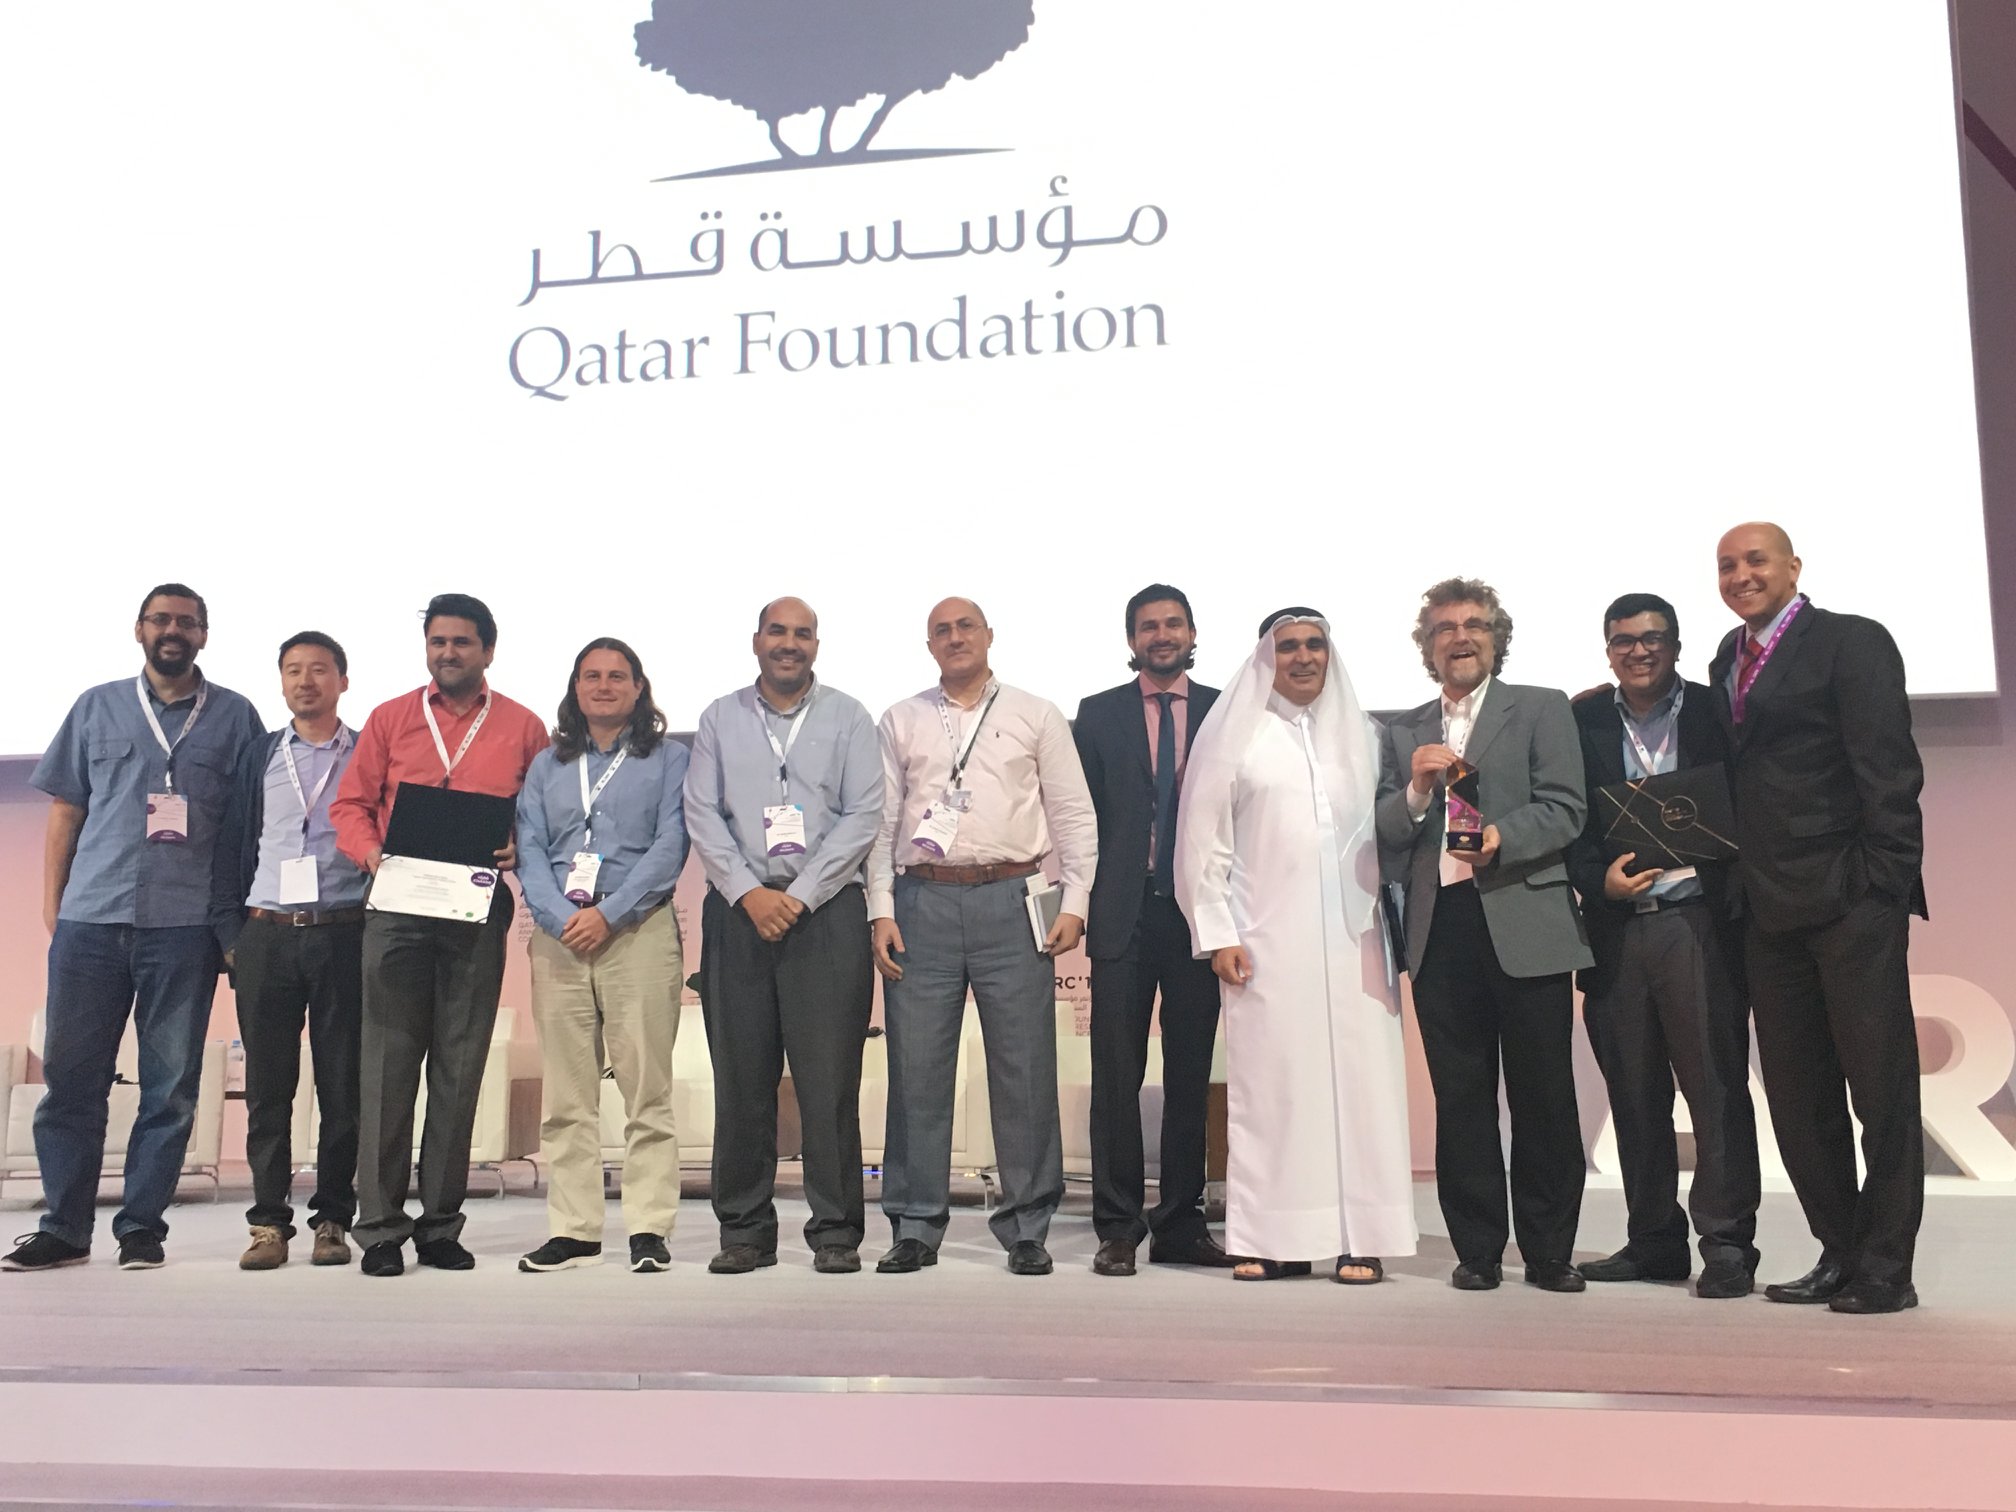 Part of the Arabic Language Technologies team after receieving the award